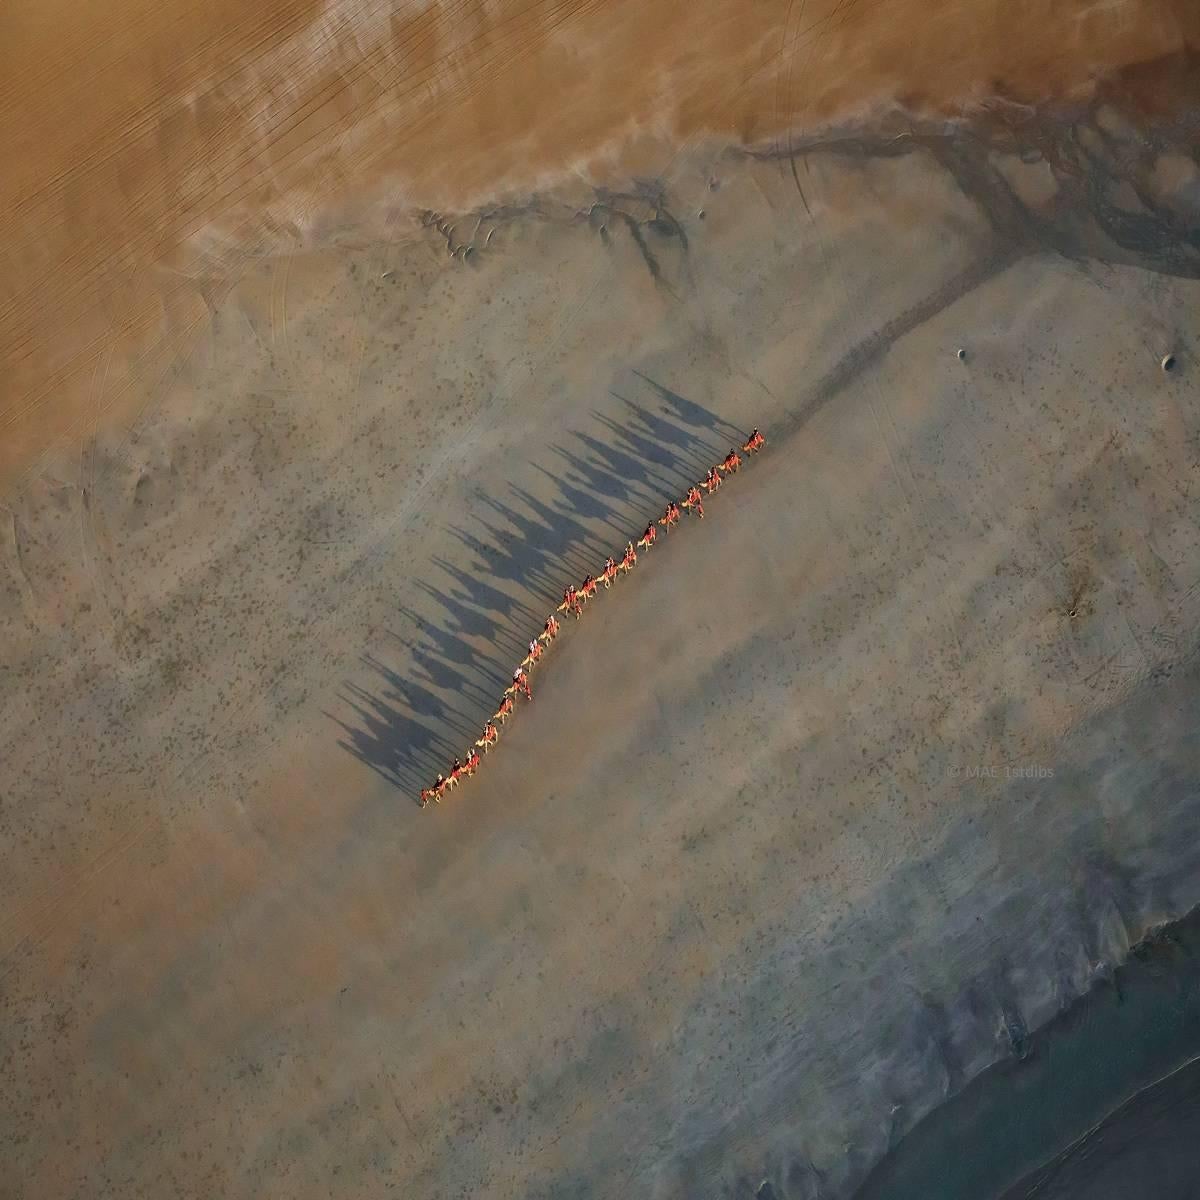 This is a new series of photography of land art depicting Earth and its land forms taken from the air. This series of aerial photography captures Earth's beauty taken in remote lands around our world, mostly untouched by mankind. From afar, in the